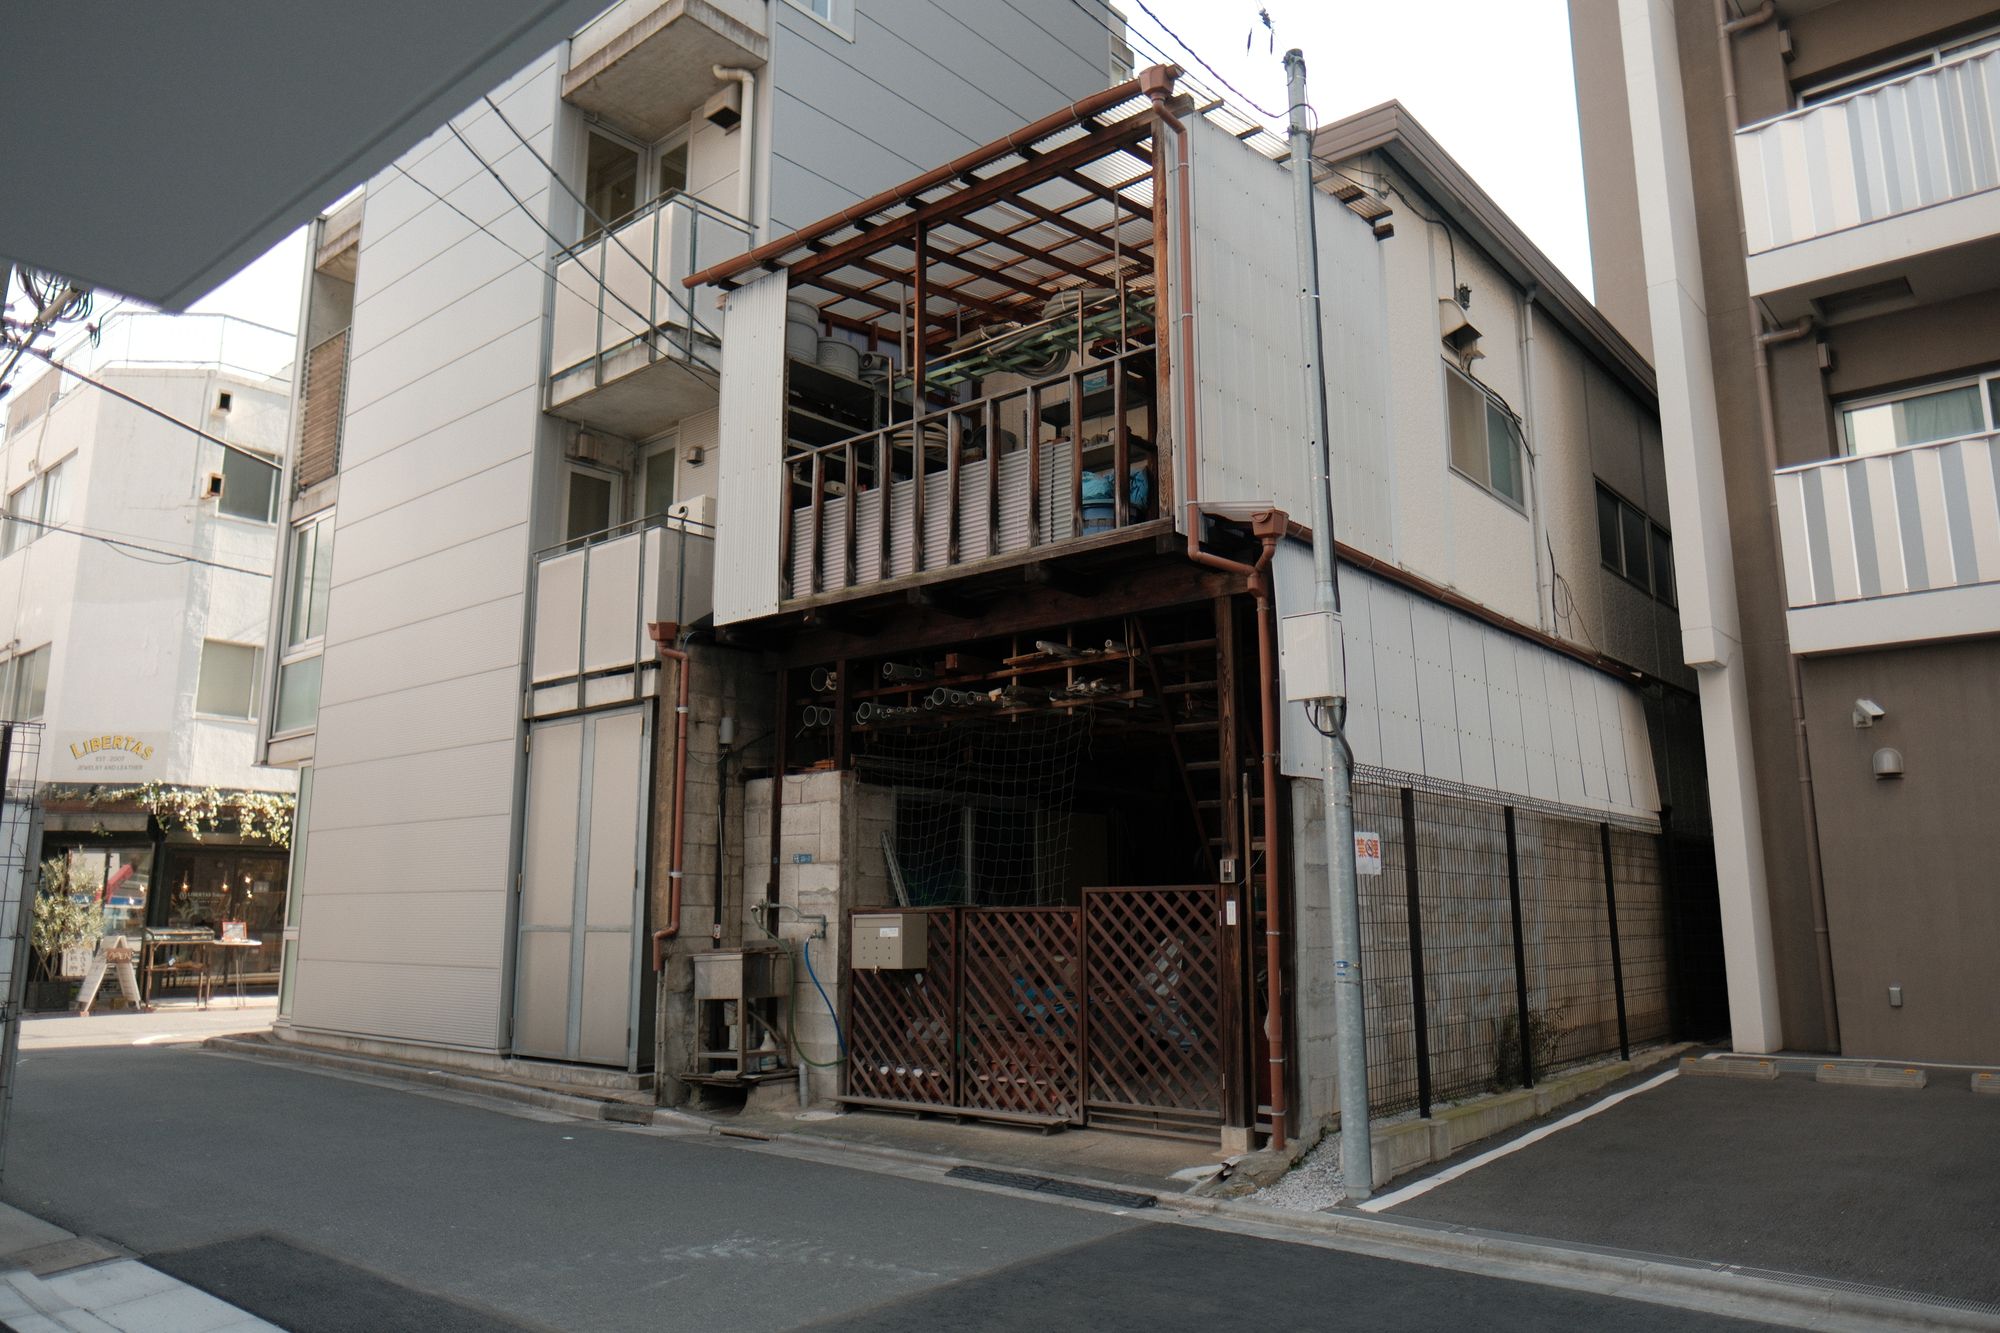 Old and squeezed Tokyo houses